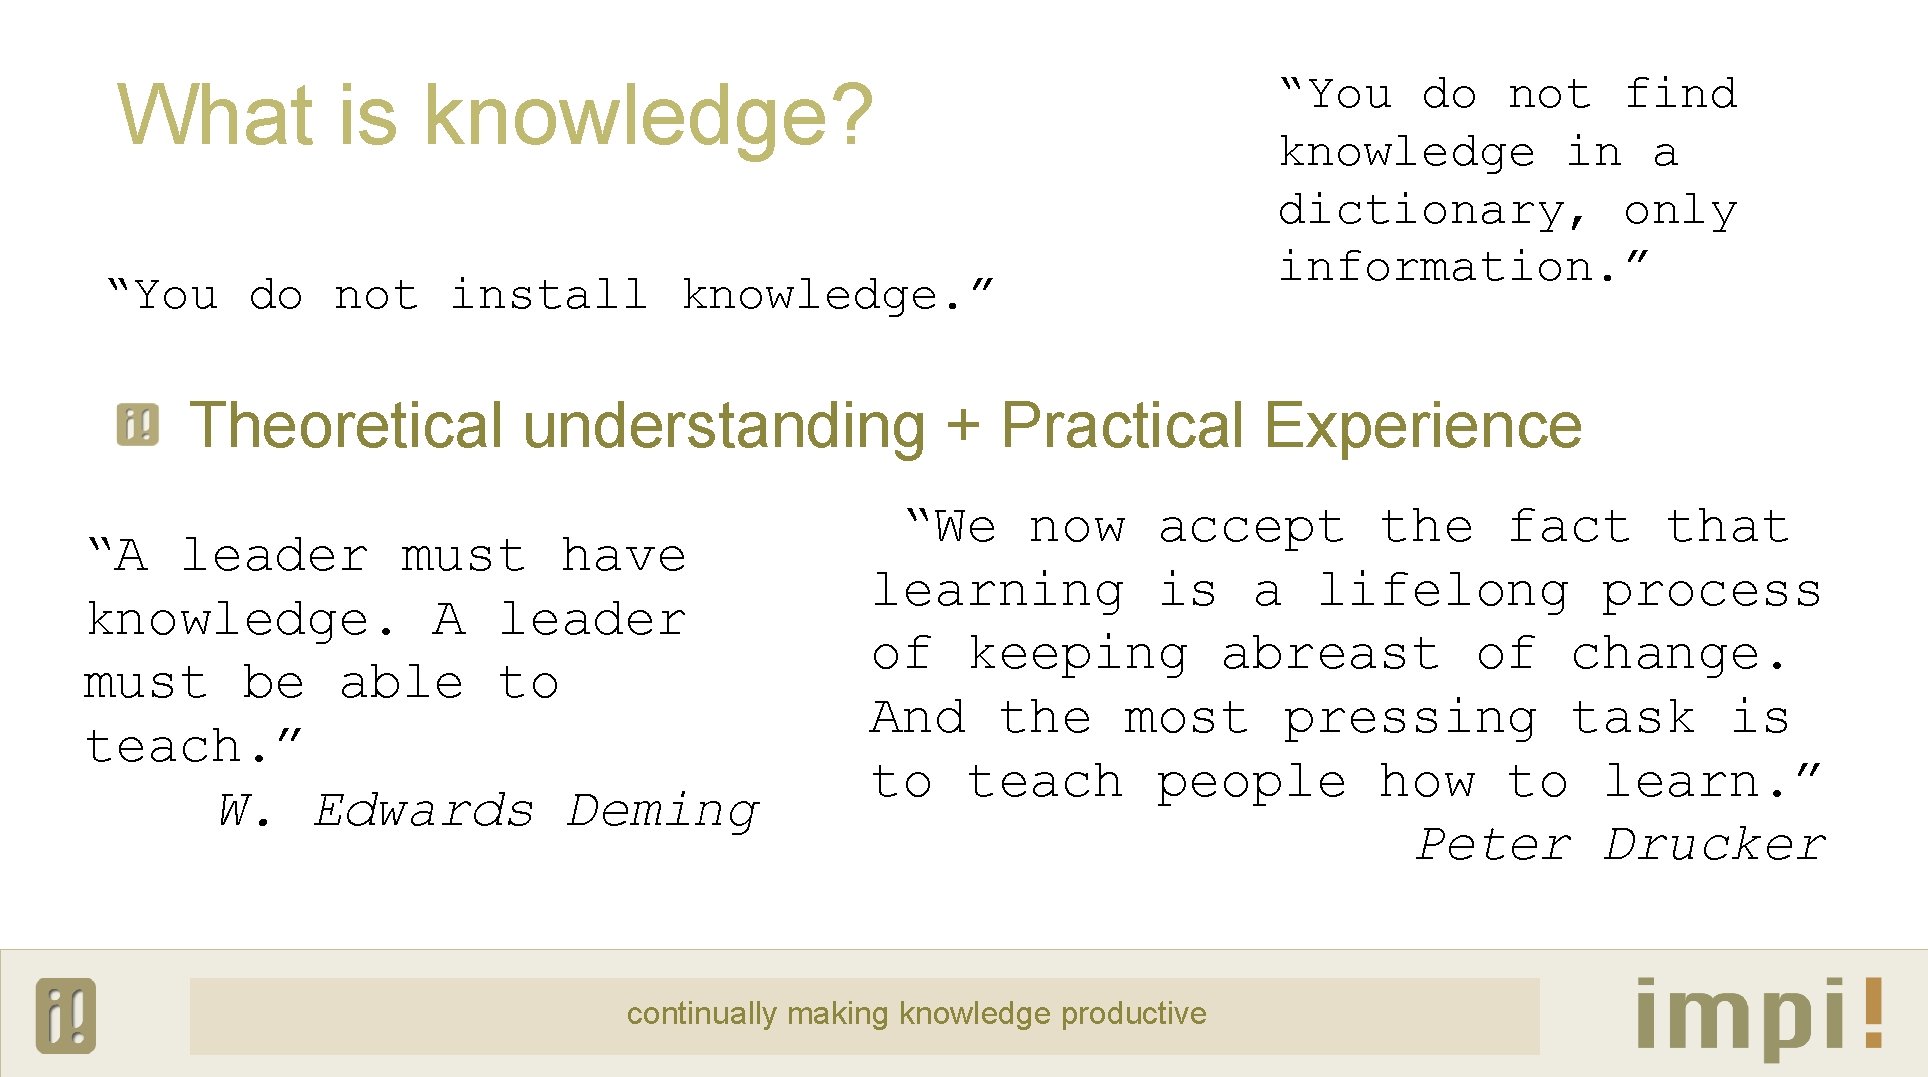 What is knowledge? “You do not install knowledge. ” “You do not find knowledge